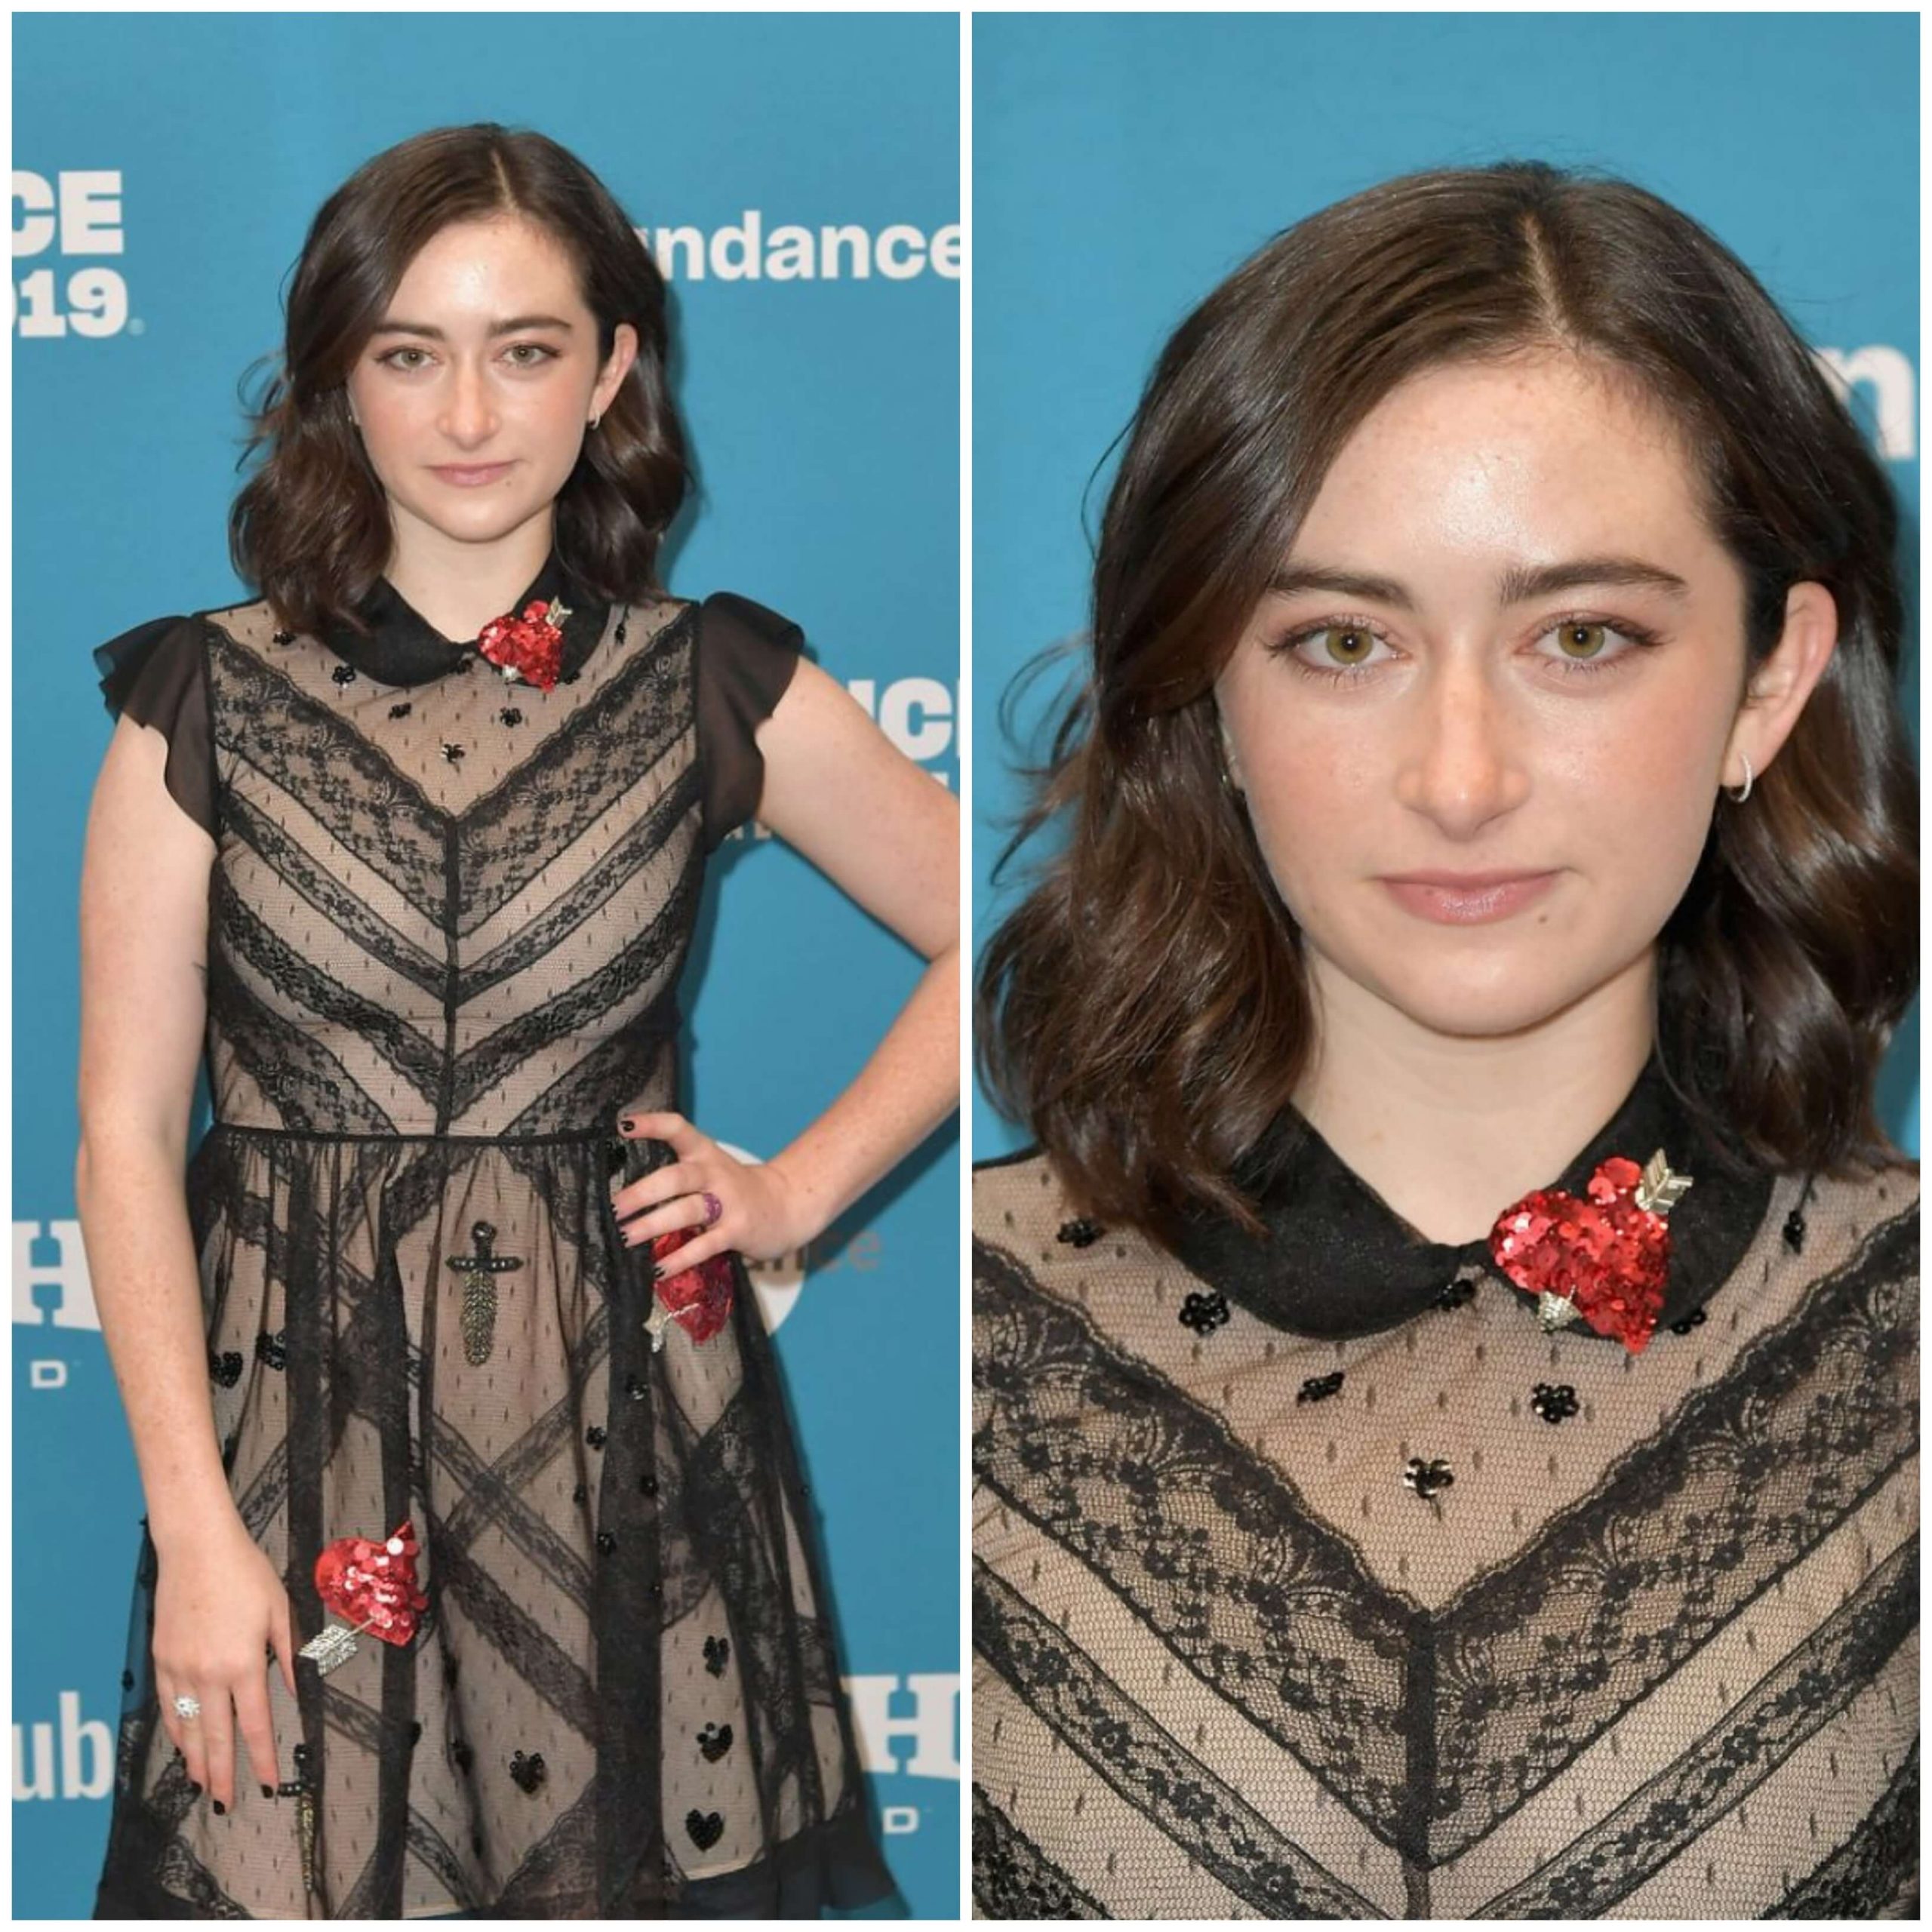 Abby Quinn In Black Embellished Gown With Red Heart Brooch at Sundance Film Festival